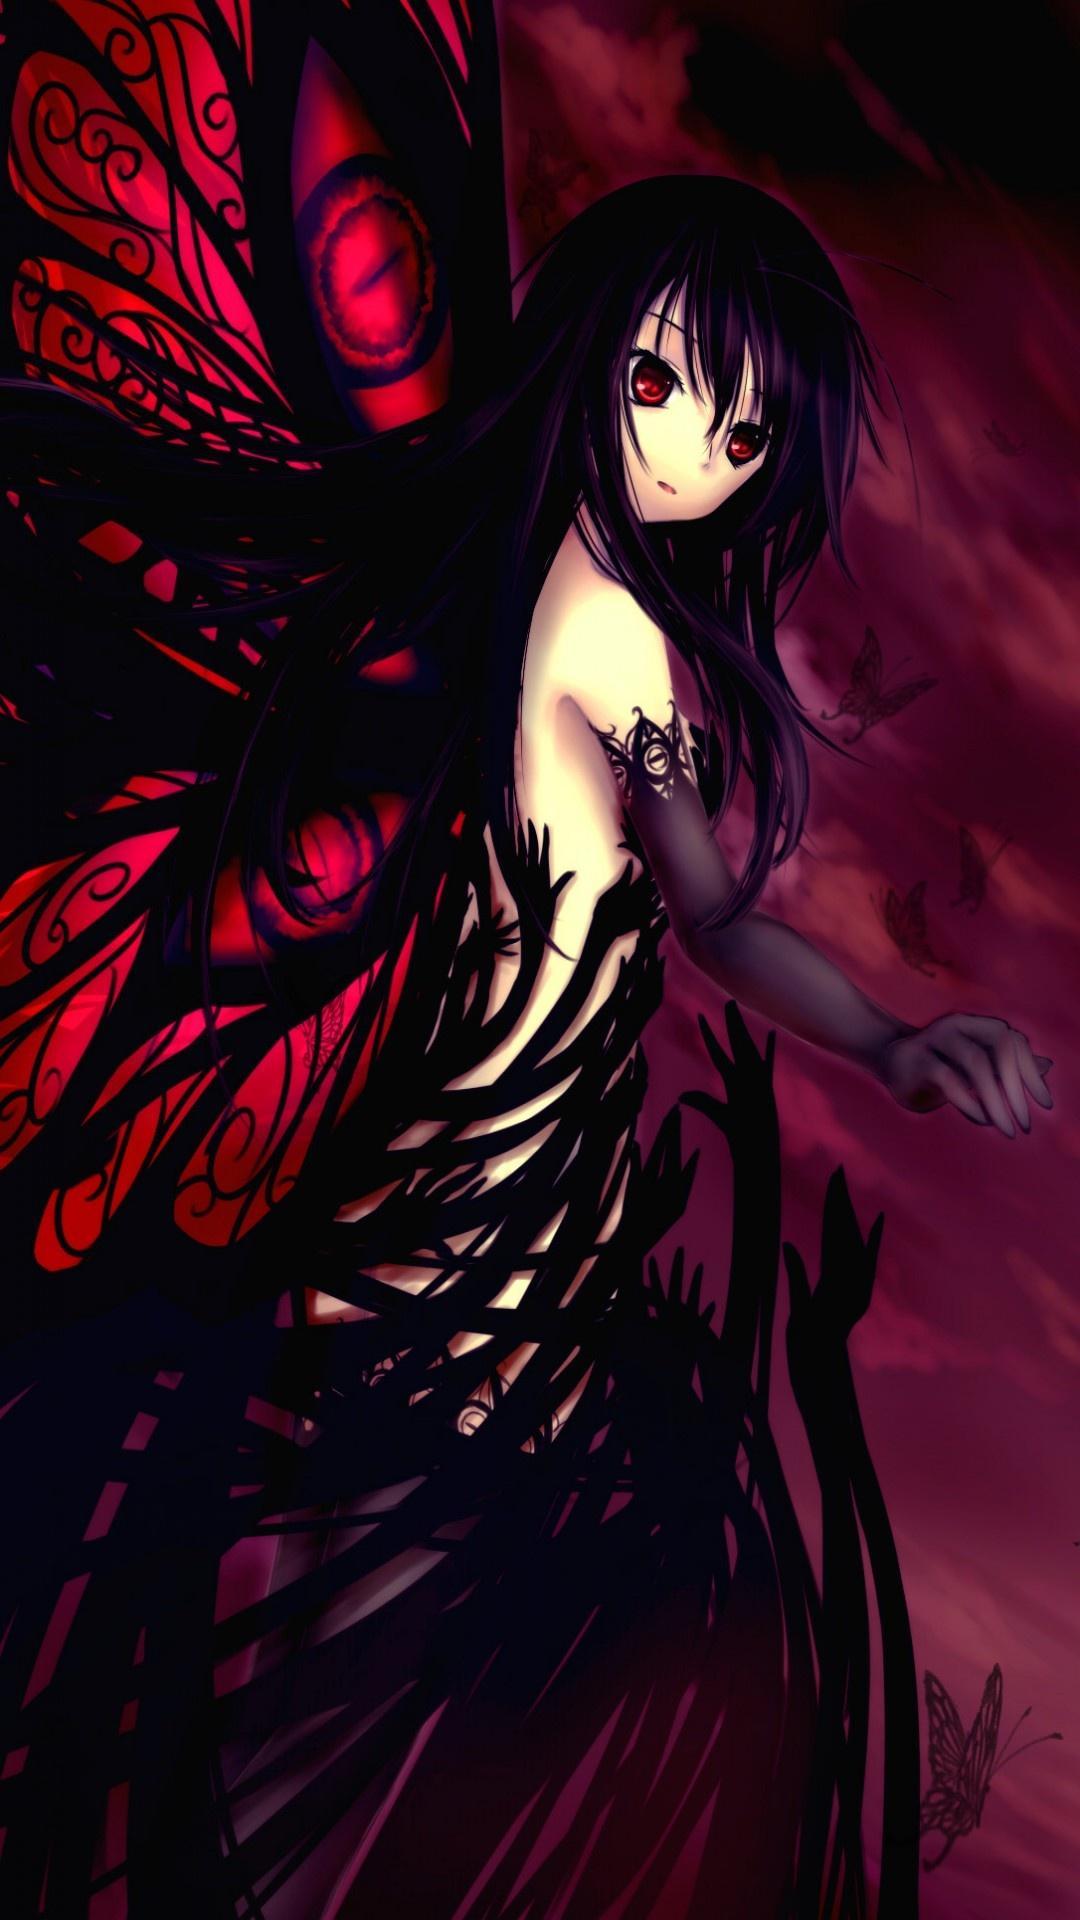 Goth Anime Girl Wallpaper Woop for Android - APK Download